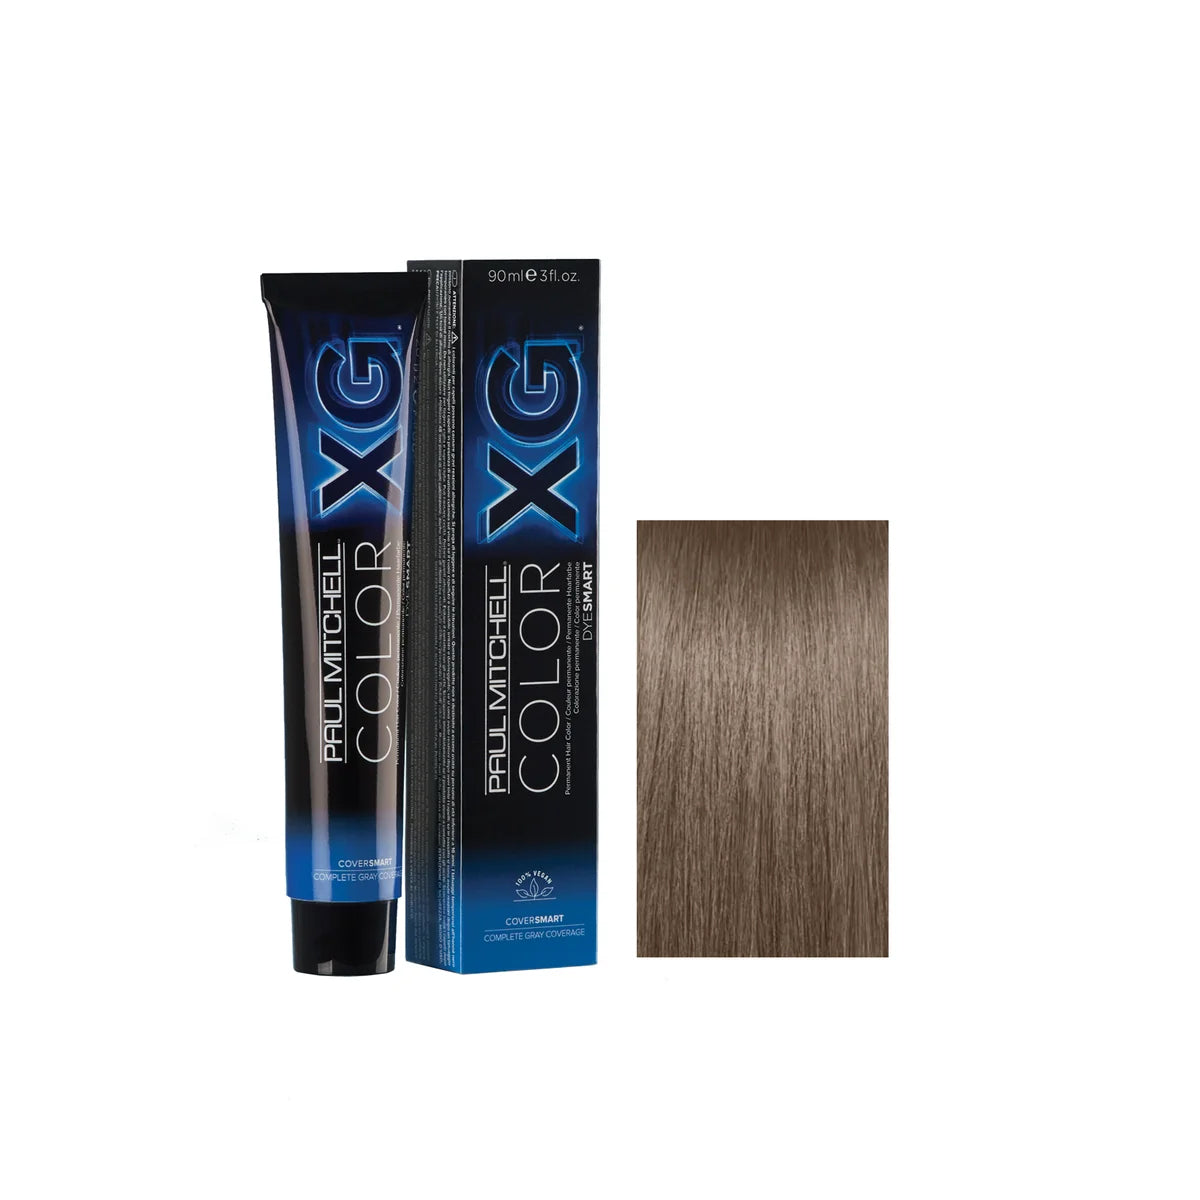 Paul Mitchell Color Xg CoverSmart Gray Covery Dyd Smart